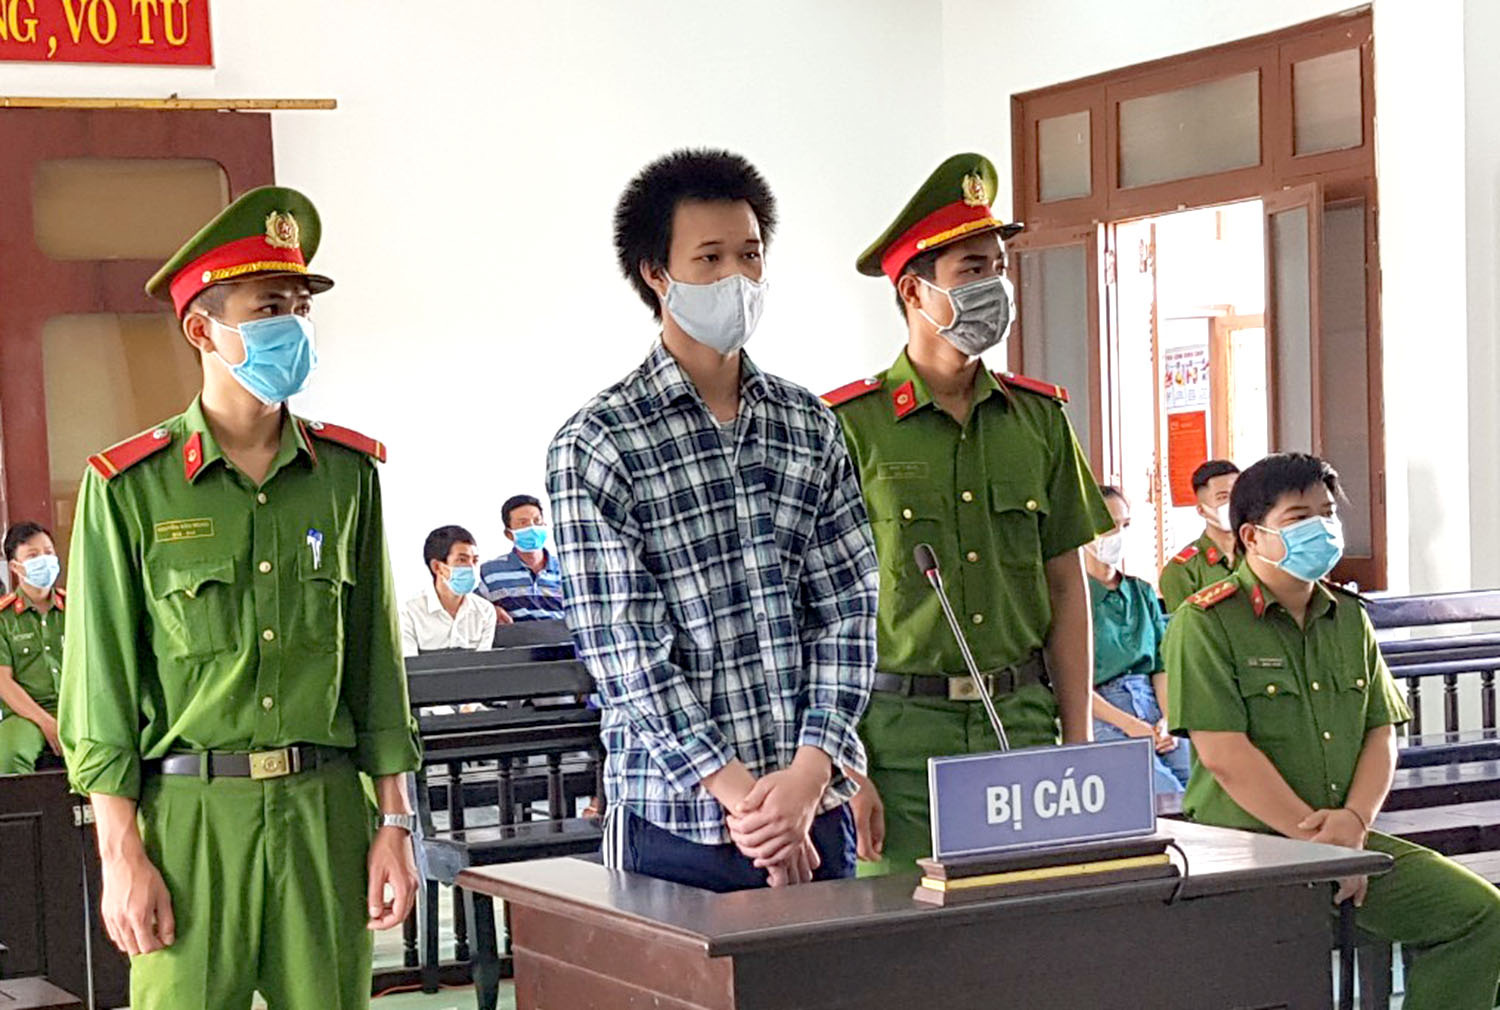 Vietnamese man sentenced to death for murdering, raping 13-year-old girl